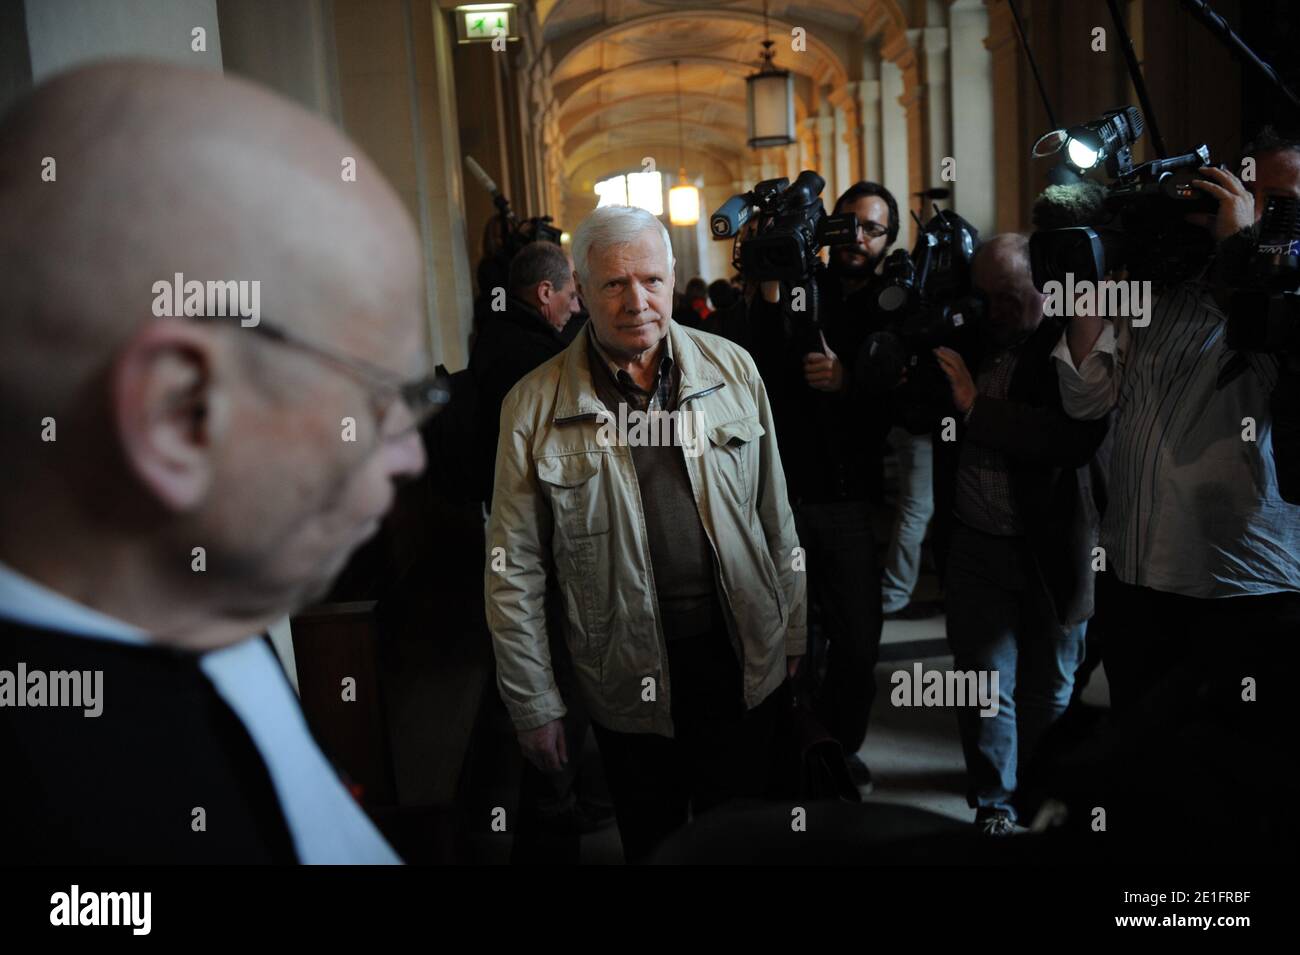 Frenchman Andre Bamberski arrives with his lawyer Francois Gibault (L) at the Palais de Justice to attend German cardiologist Dieter Krombach's trial for the murder of Kalinka Bamberski, in Paris, France on March 29, 2011. The German doctor is accused of having raped and killed his then 14-year-old stepdaughter, Kalinka Bamberski, in the summer of 1982 while she was holidaying with her mother at Krombach's home at Lake Constance, southern Germany. A court in Germany ruled that Krombach could not be held responsible for the death, but in 1995 a court in Paris found the doctor guilty of manslaug Stock Photo